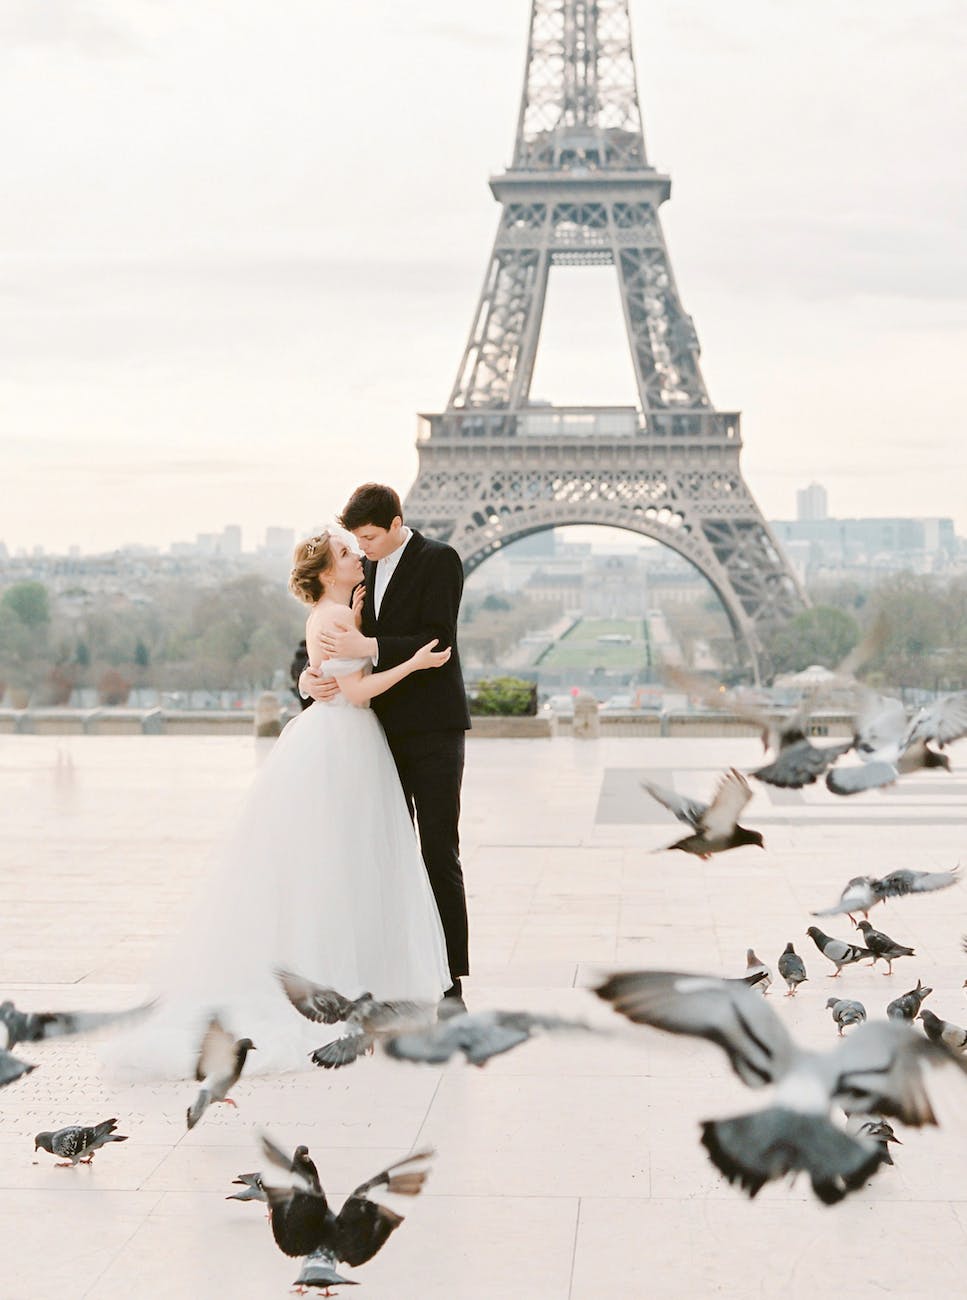 pigeons around newlyweds standing with eiffel tower behind